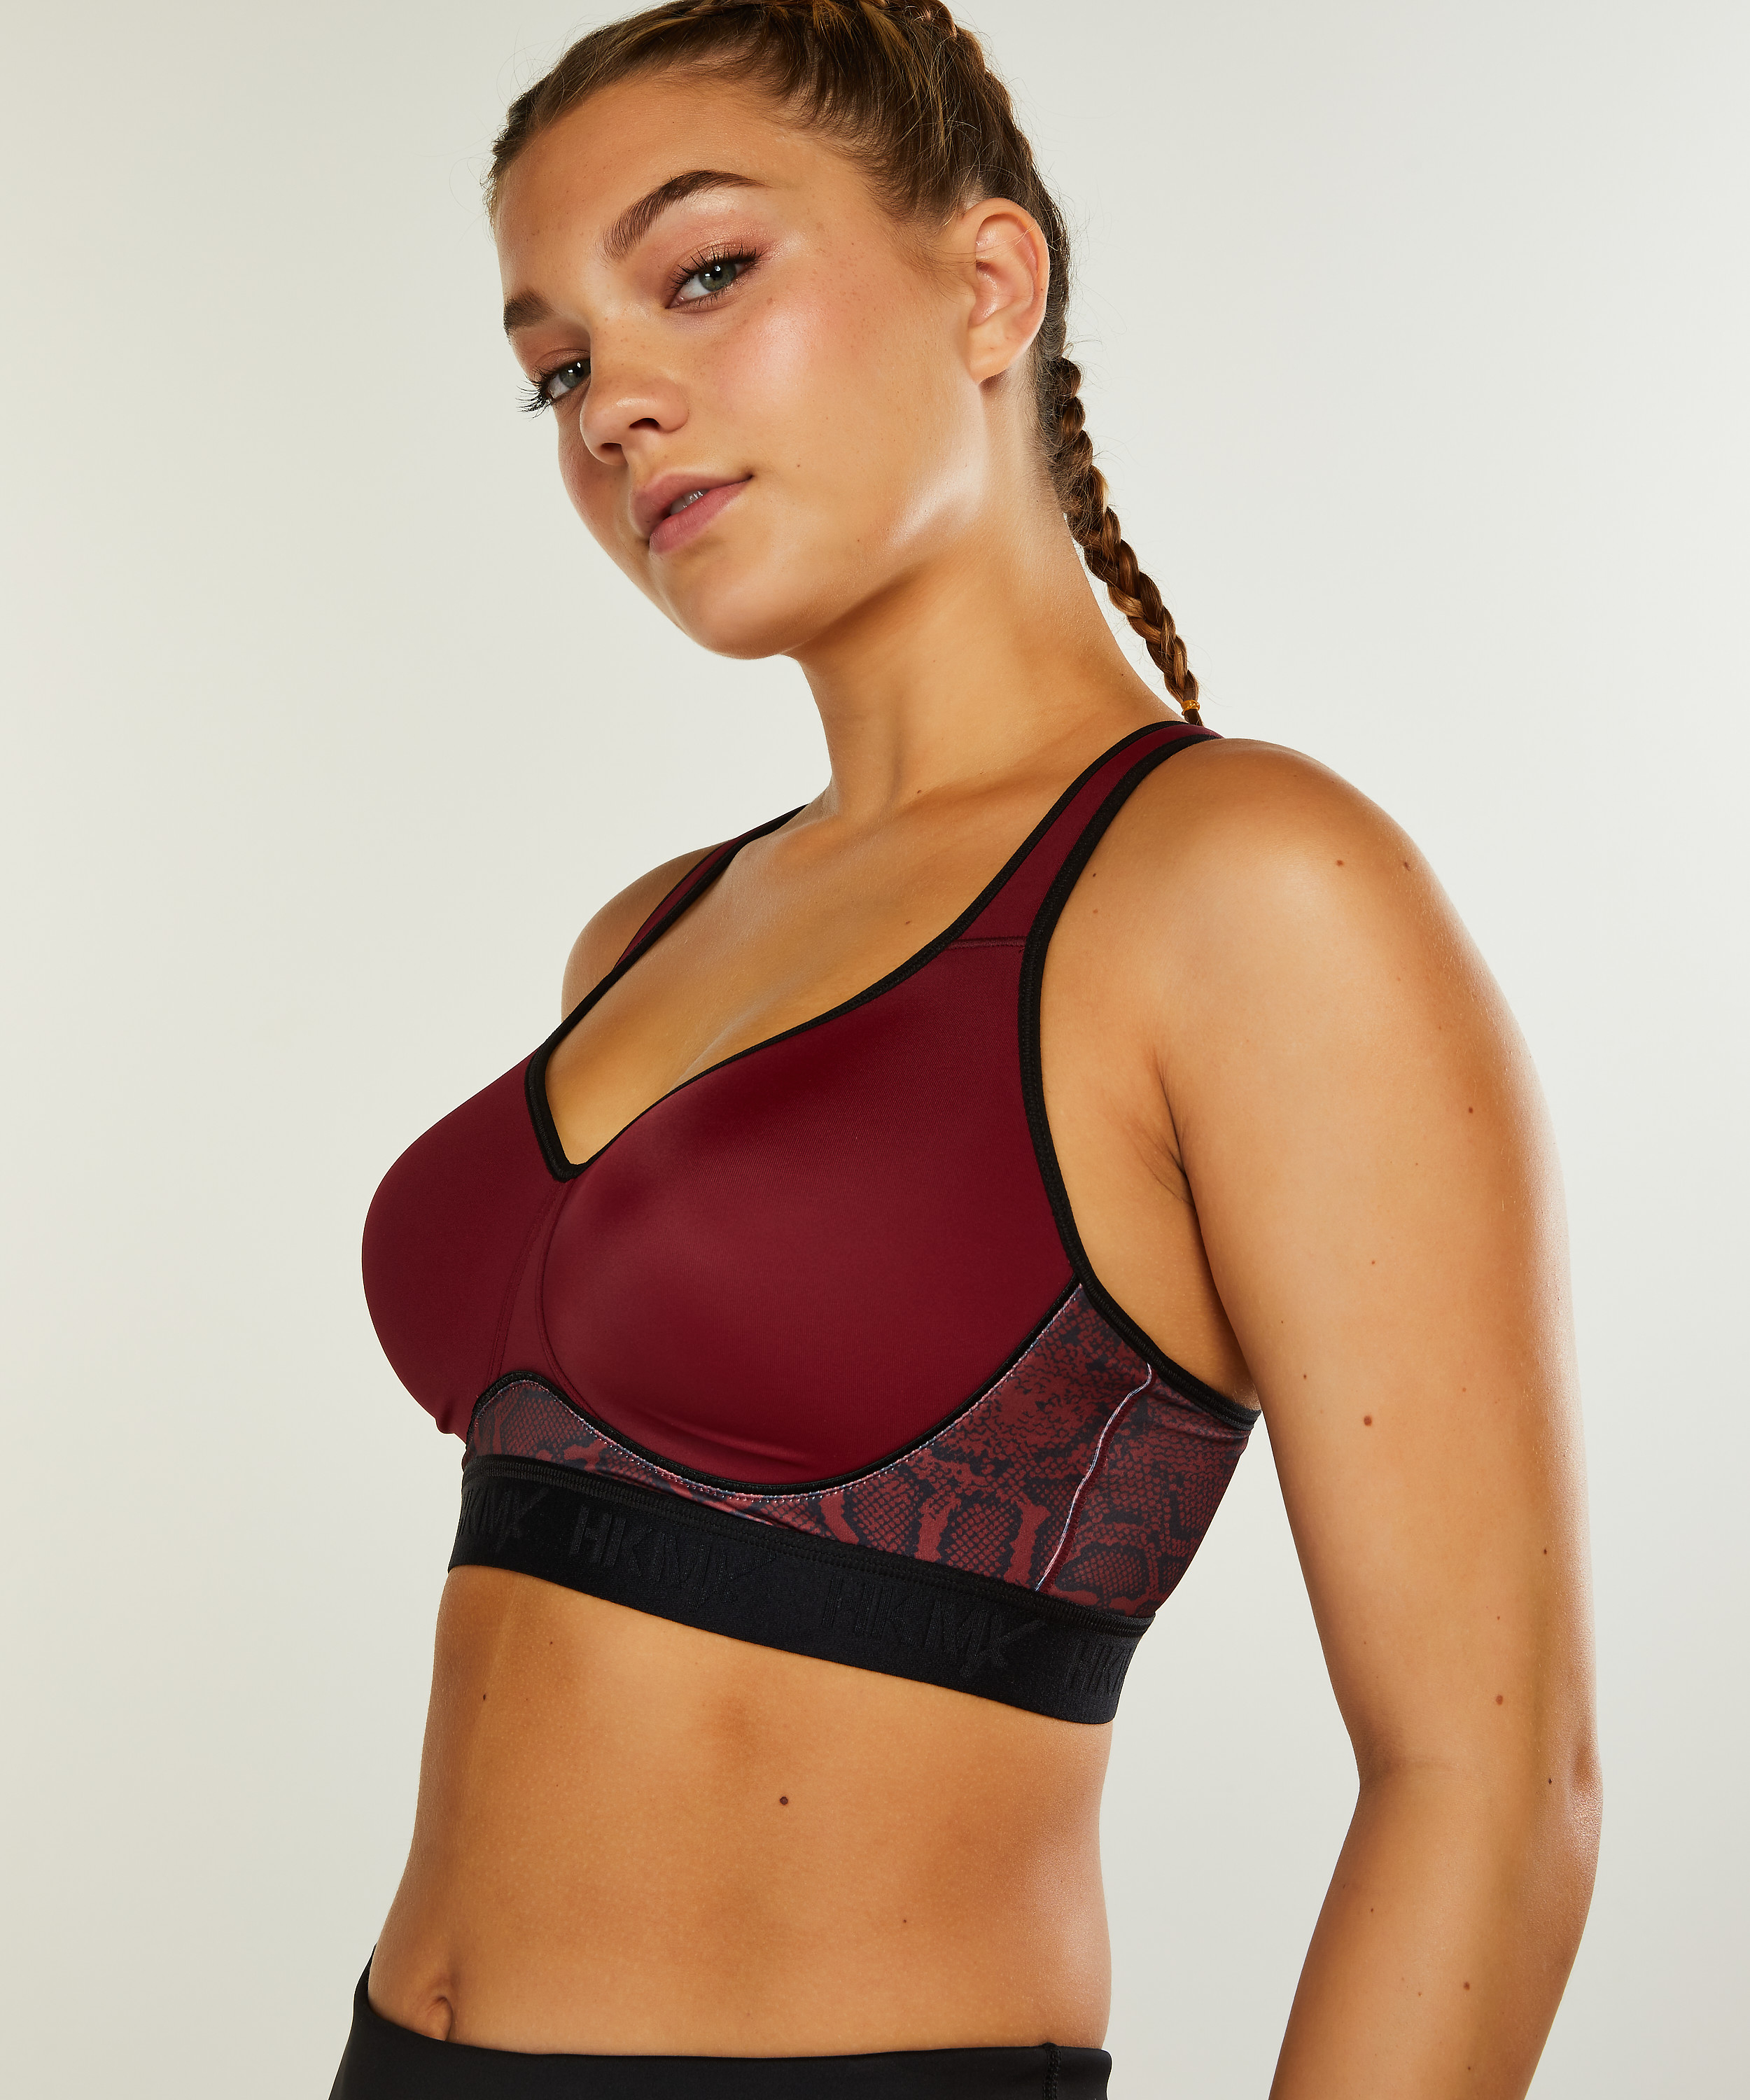 HKMX Sports bra The All Star Level 2, Red, main